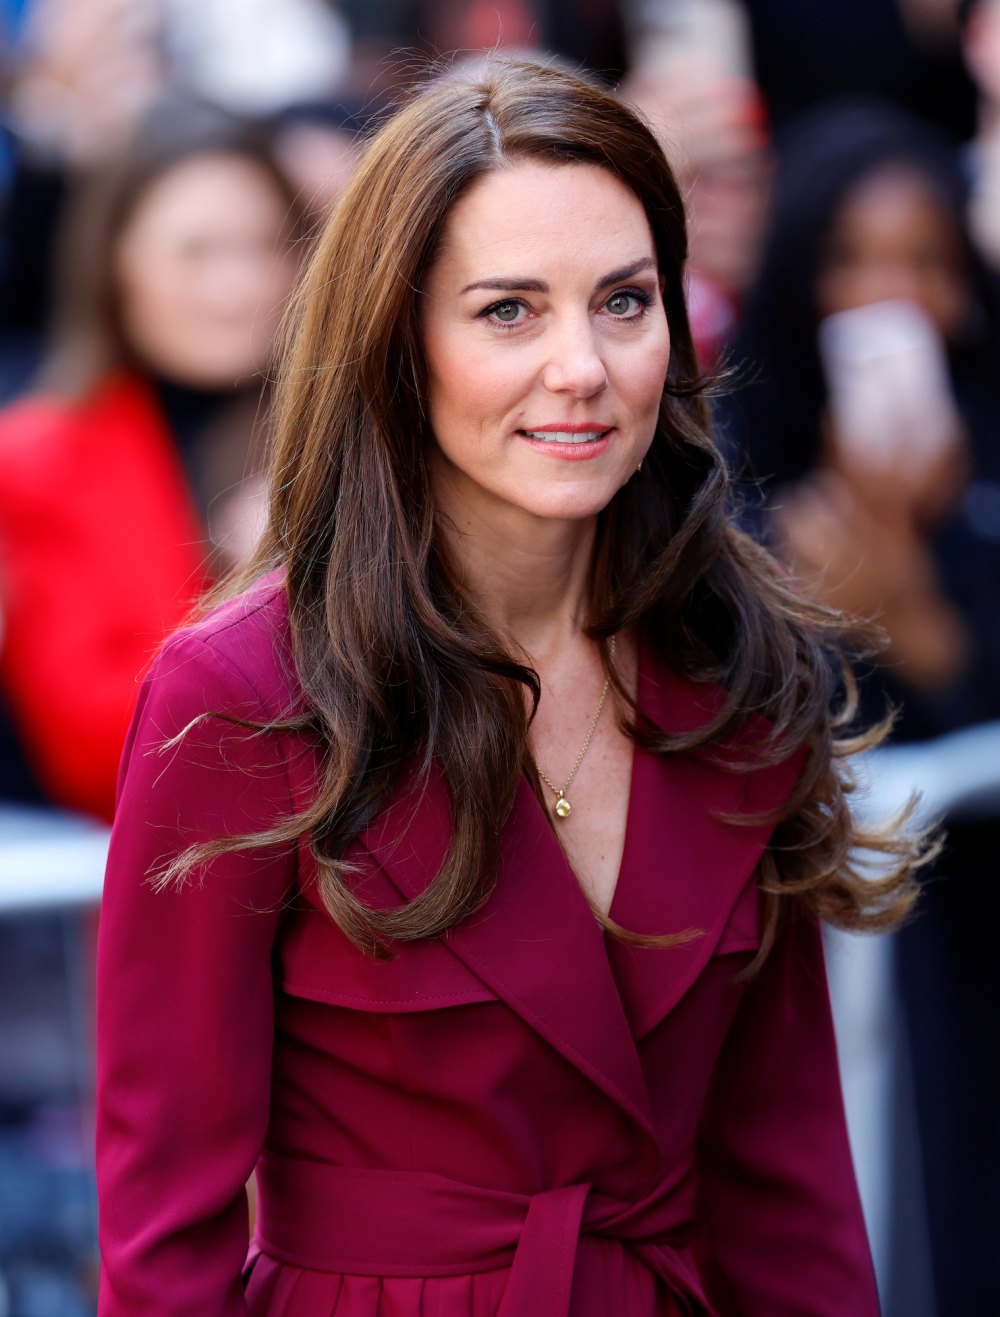 Kensington Palace is reportedly working on a top-secret plan for Kate Middleton's return to her royal duties